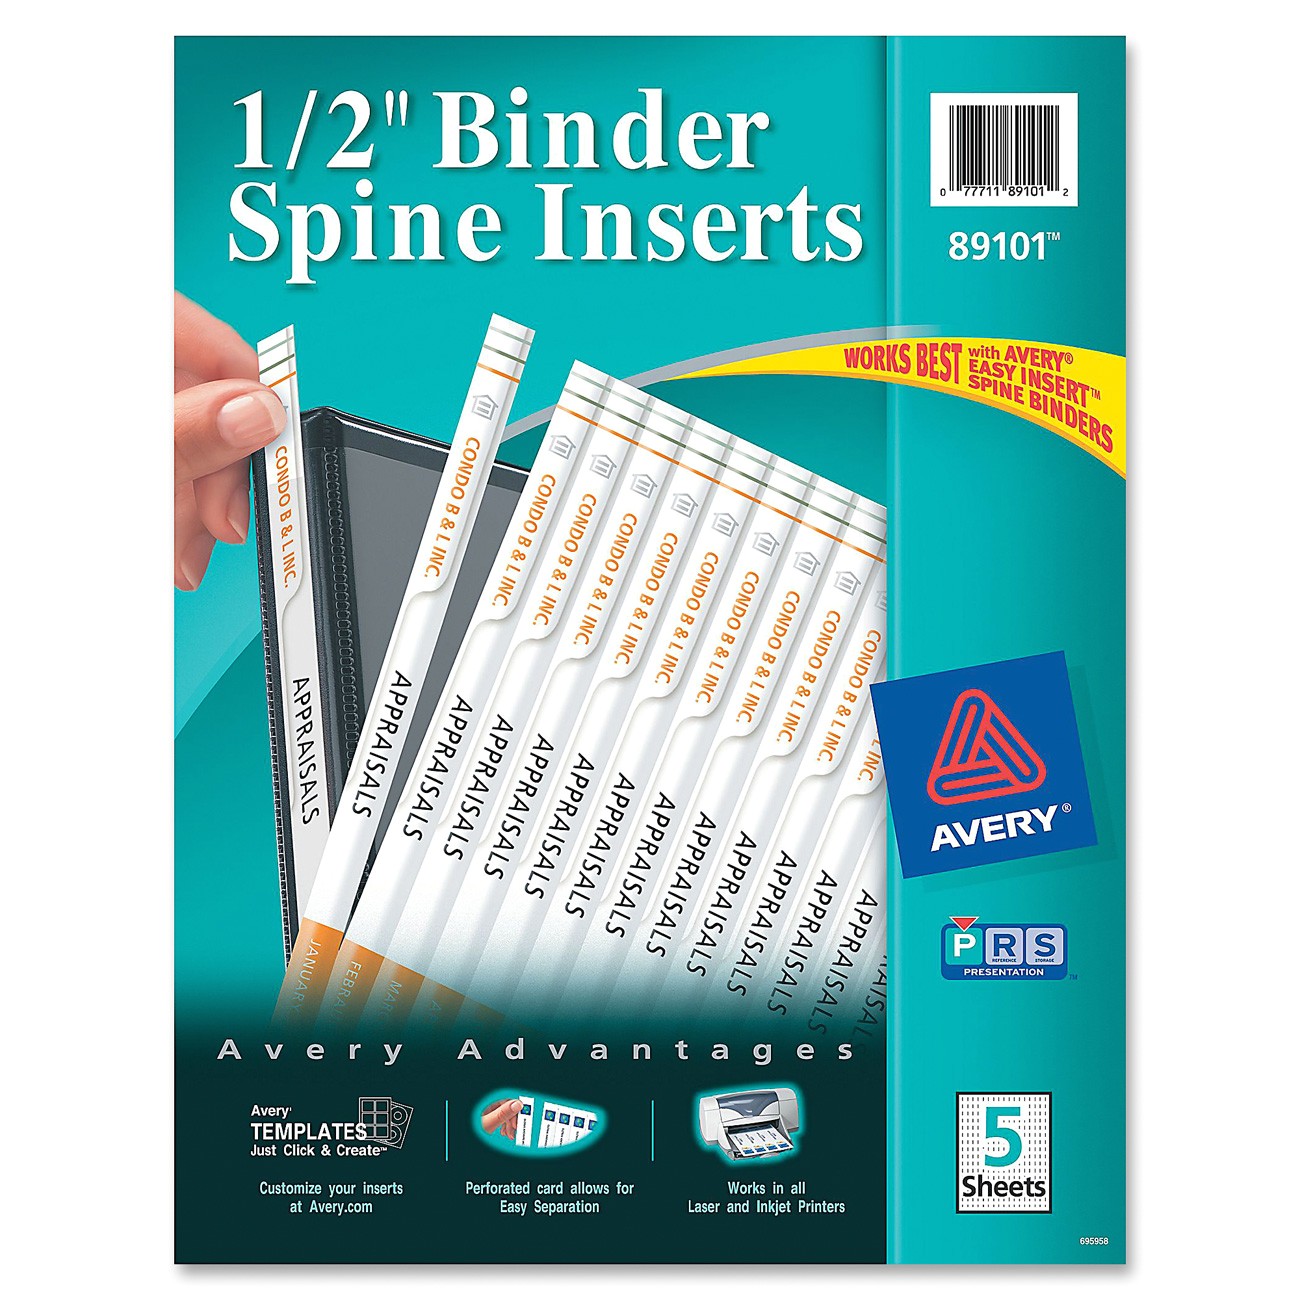 Avery Binder Templates 1 1/2 Avery 89101 Binder Spine Inserts 1 2 Quot Sheet White 80